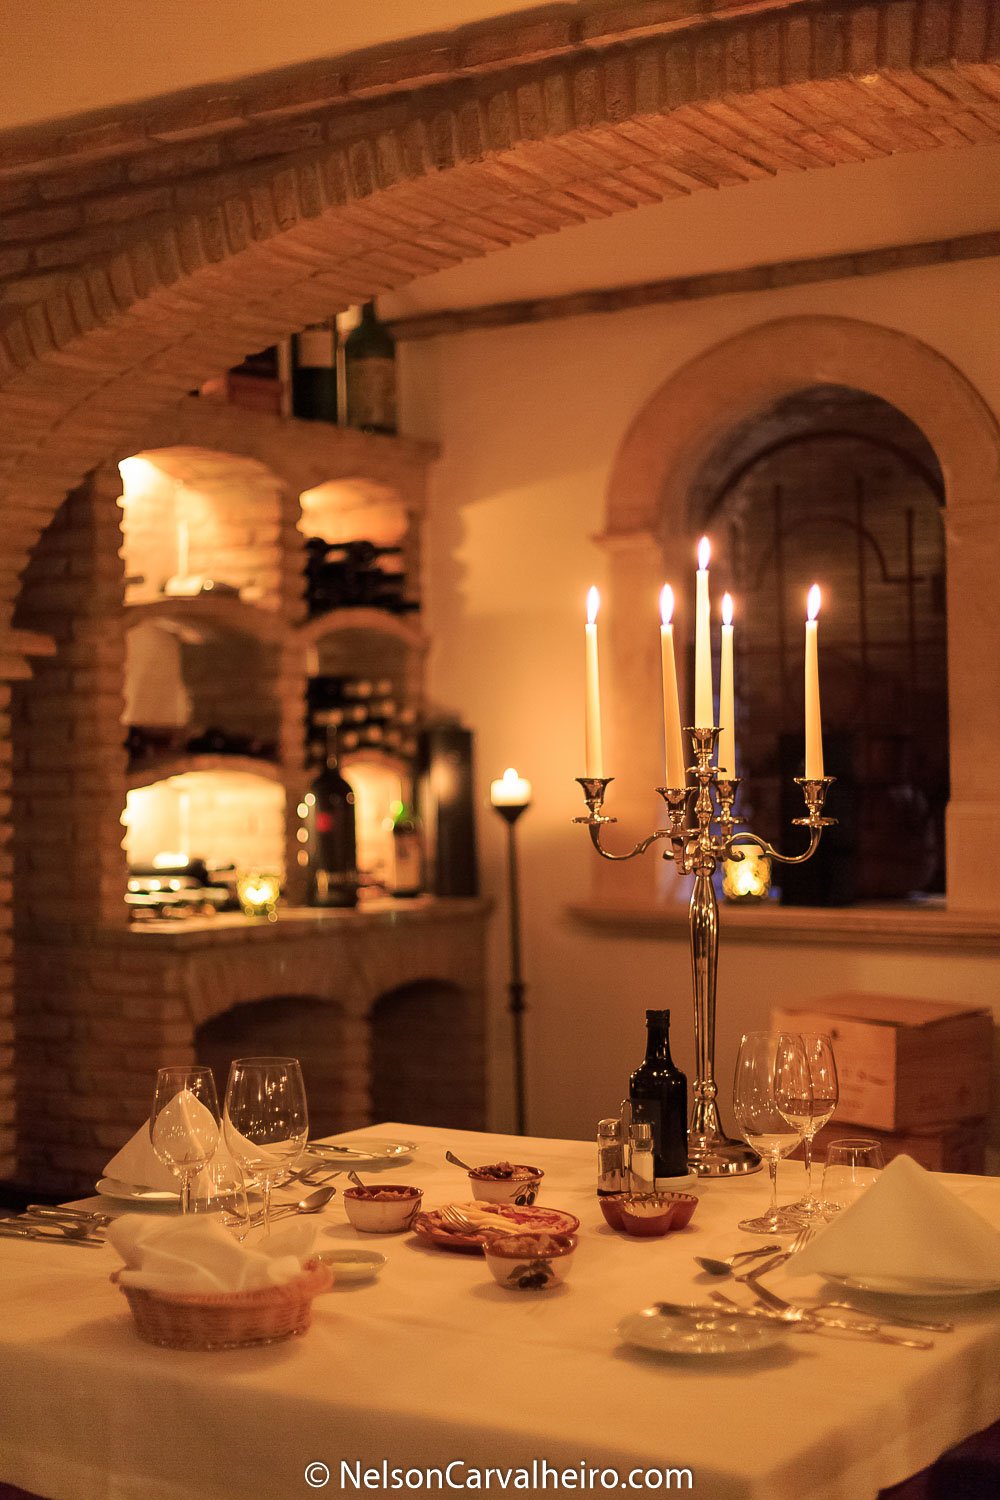 Alentejo Wine Travel Guide - Herdade dos Grous - Dinner at the Wine Cellar